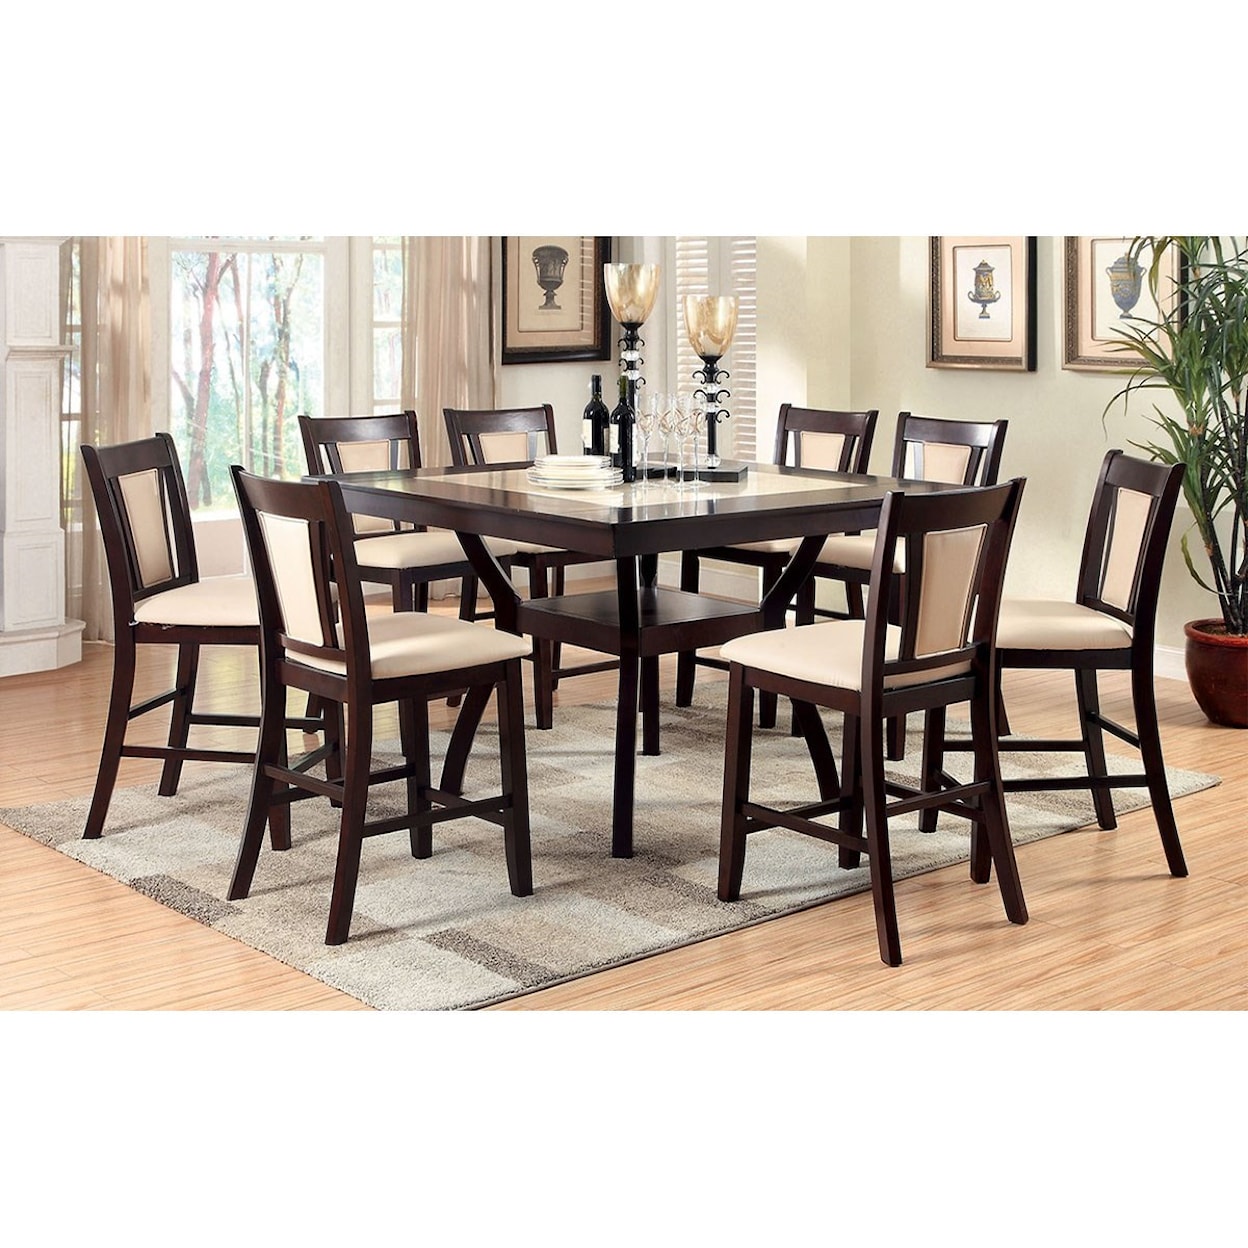 Furniture of America Brent 9 Pc Counter Height Dining Set